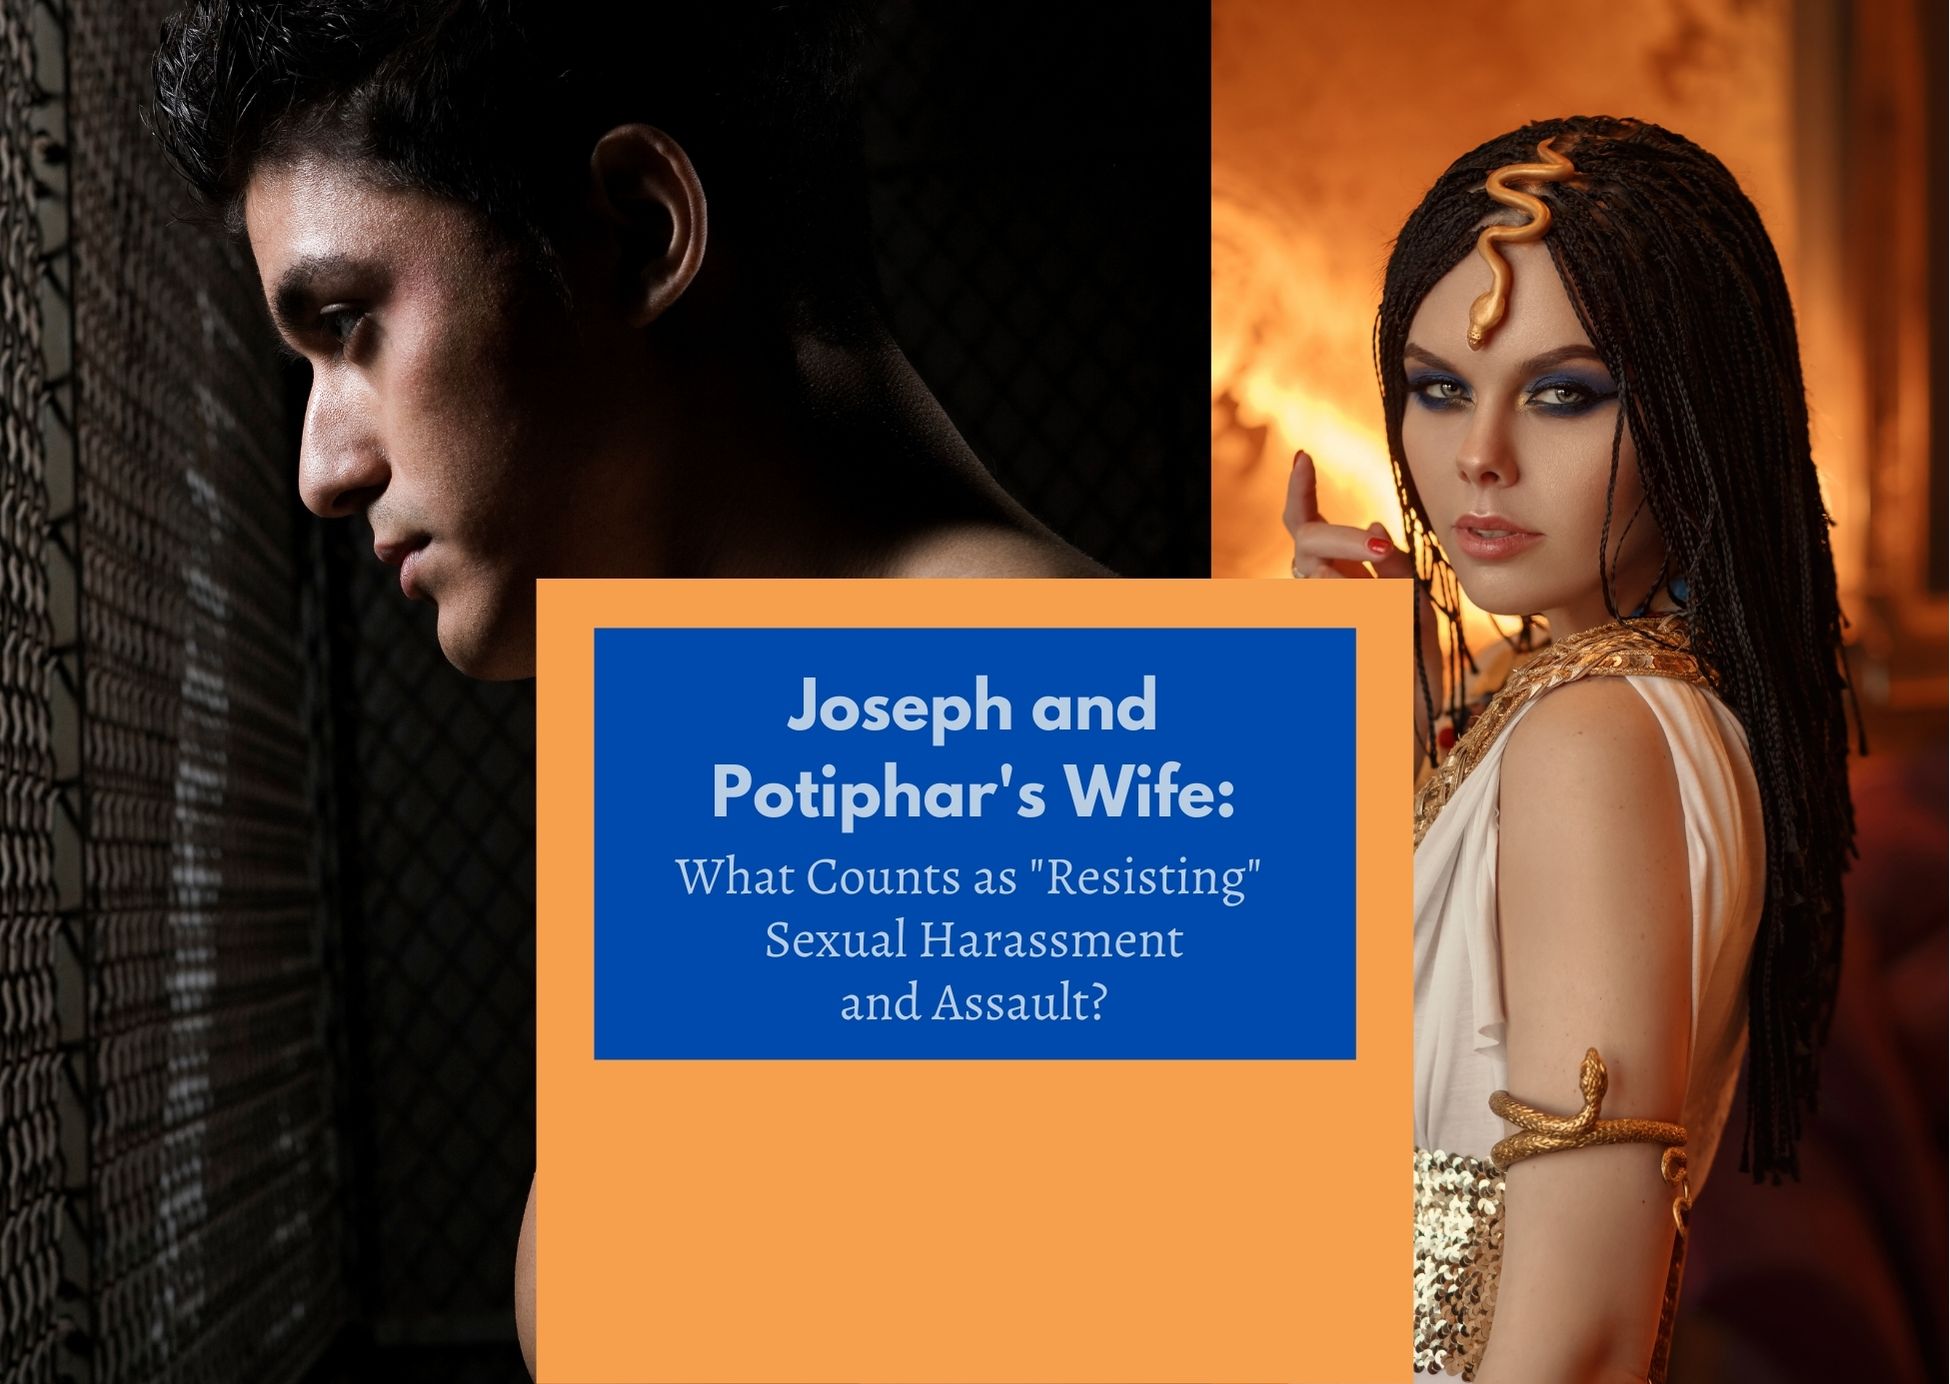 Joseph and Potiphars Wife Resisting Sexual Harassment and Assault Life-Saving Divorce pic